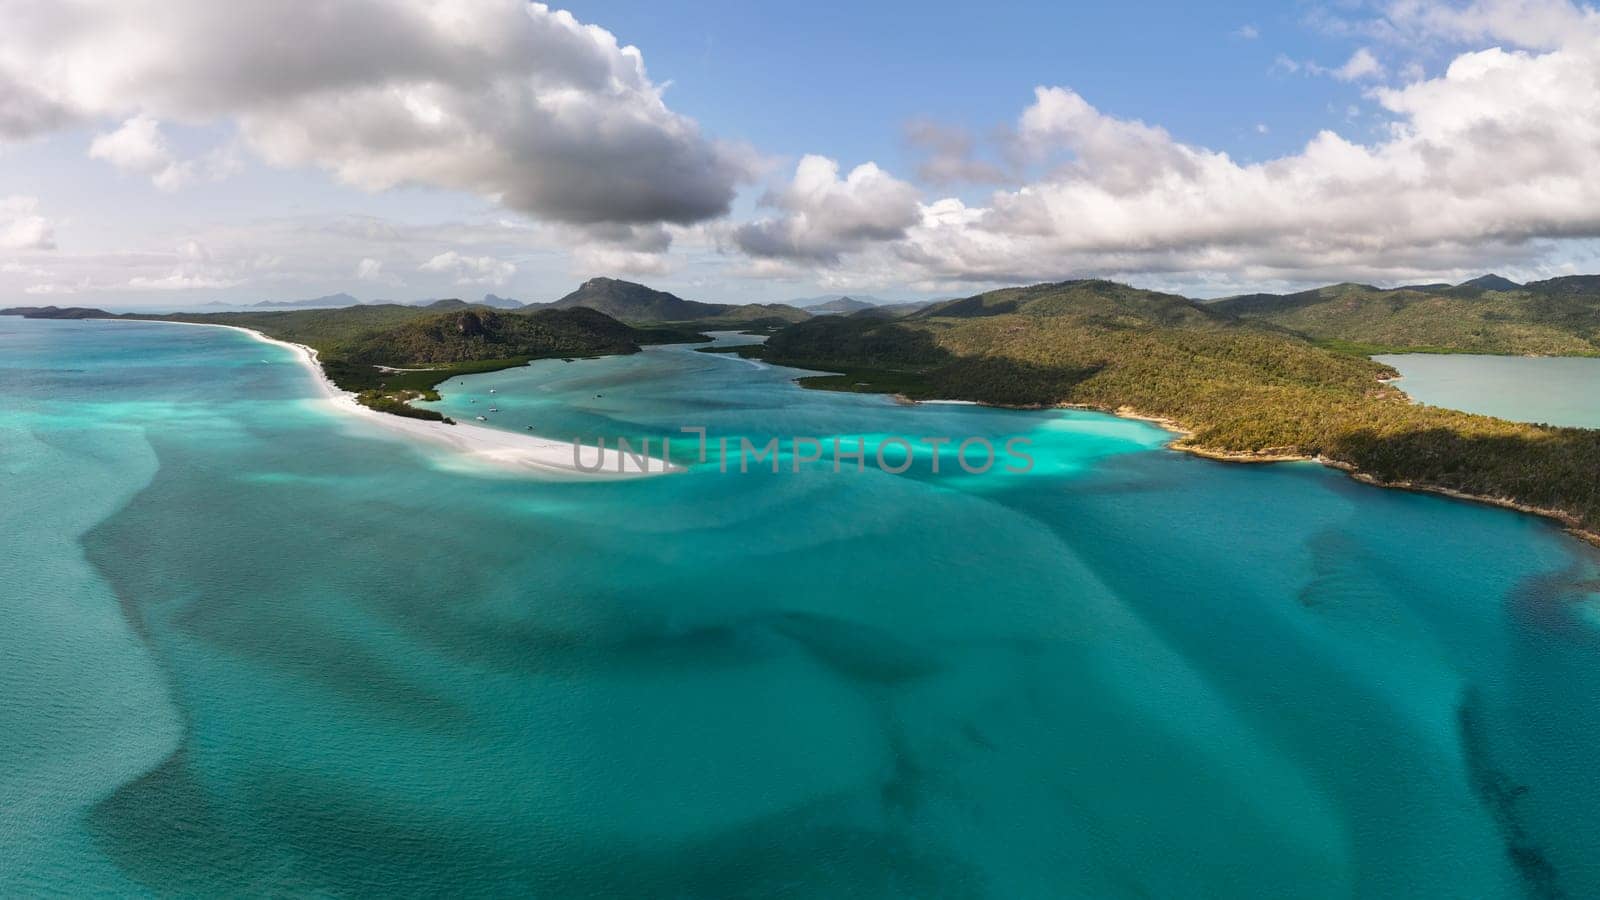 Drone shot of famous Hill Inlet, Whitsunday Islands at high tide by StefanMal